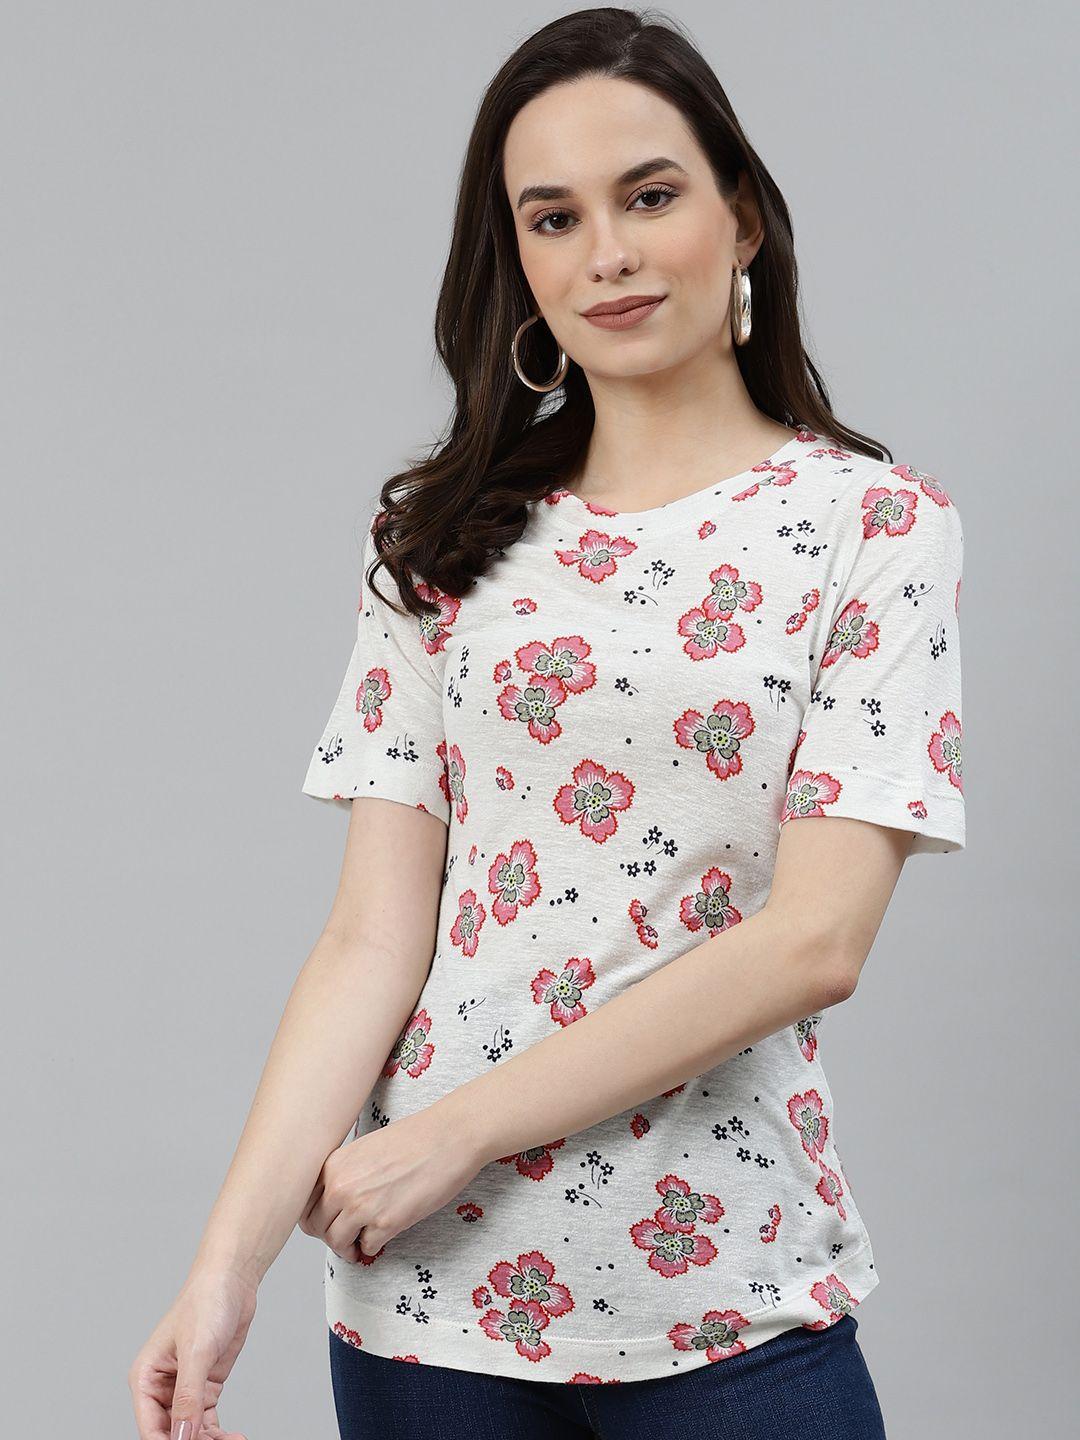 marks & spencer women sustainable off-white & red floral printed pure cotton t-shirt